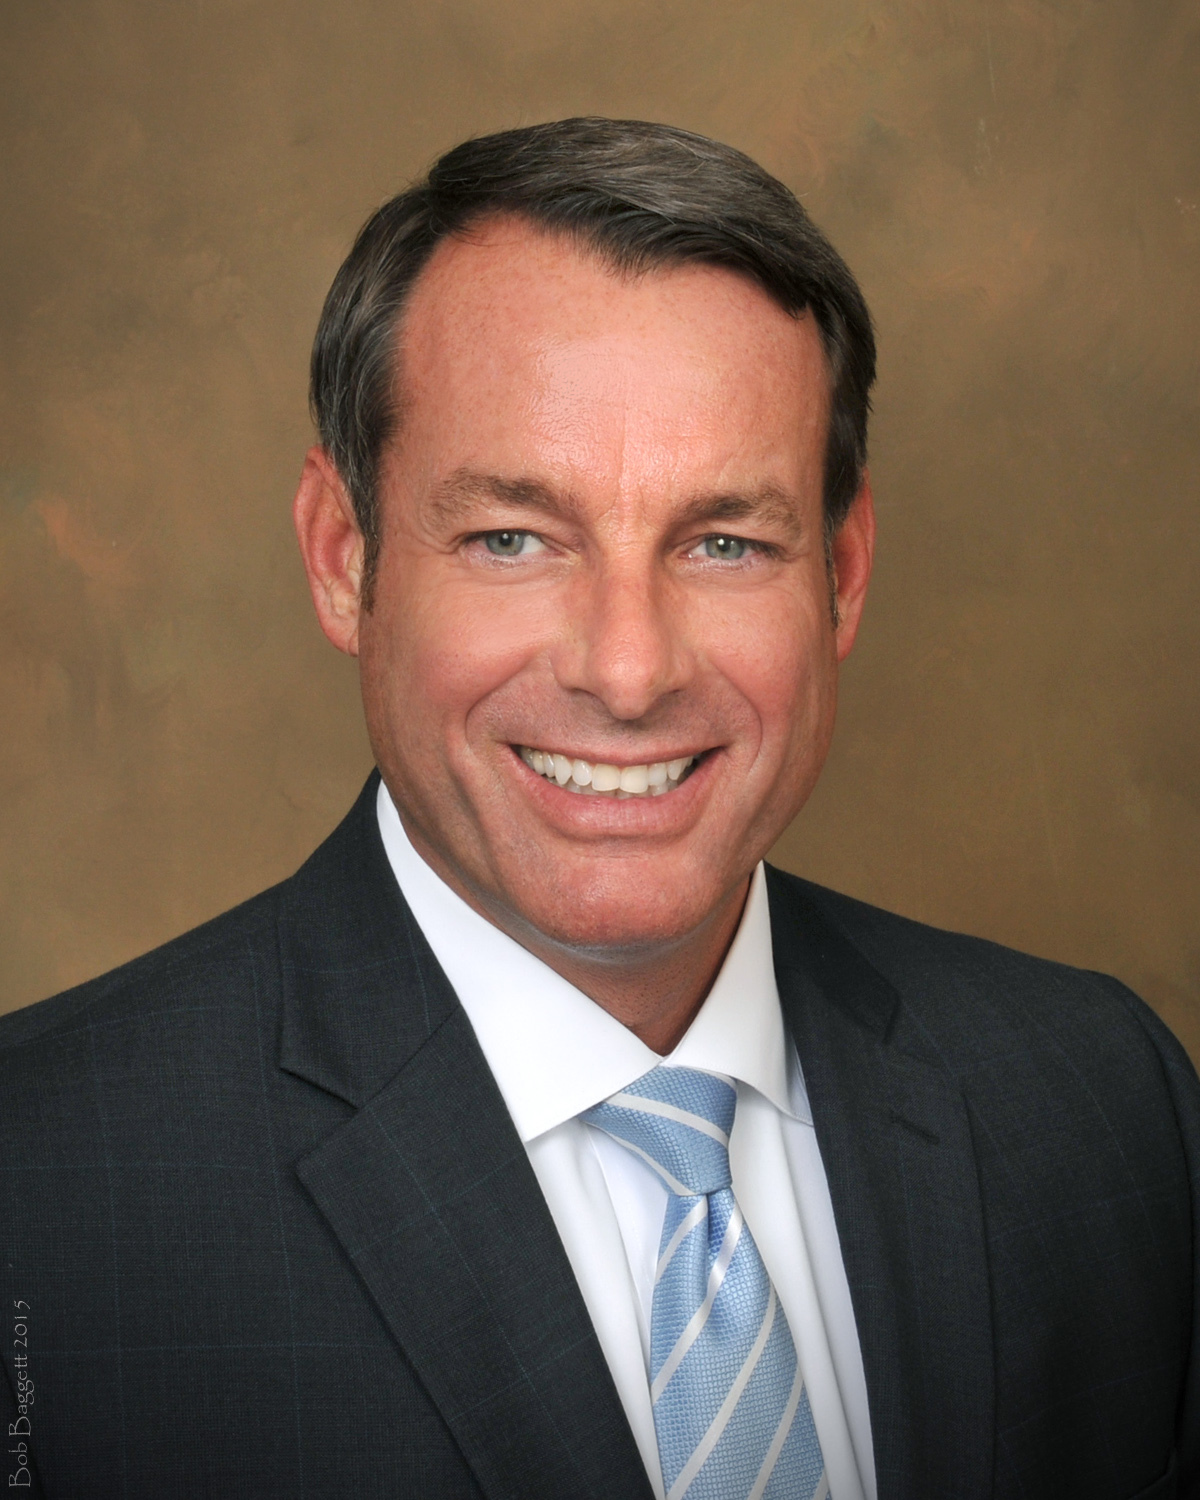 Bank of Tampa Pinellas County Market President Scott Gault. Courtesy photo.